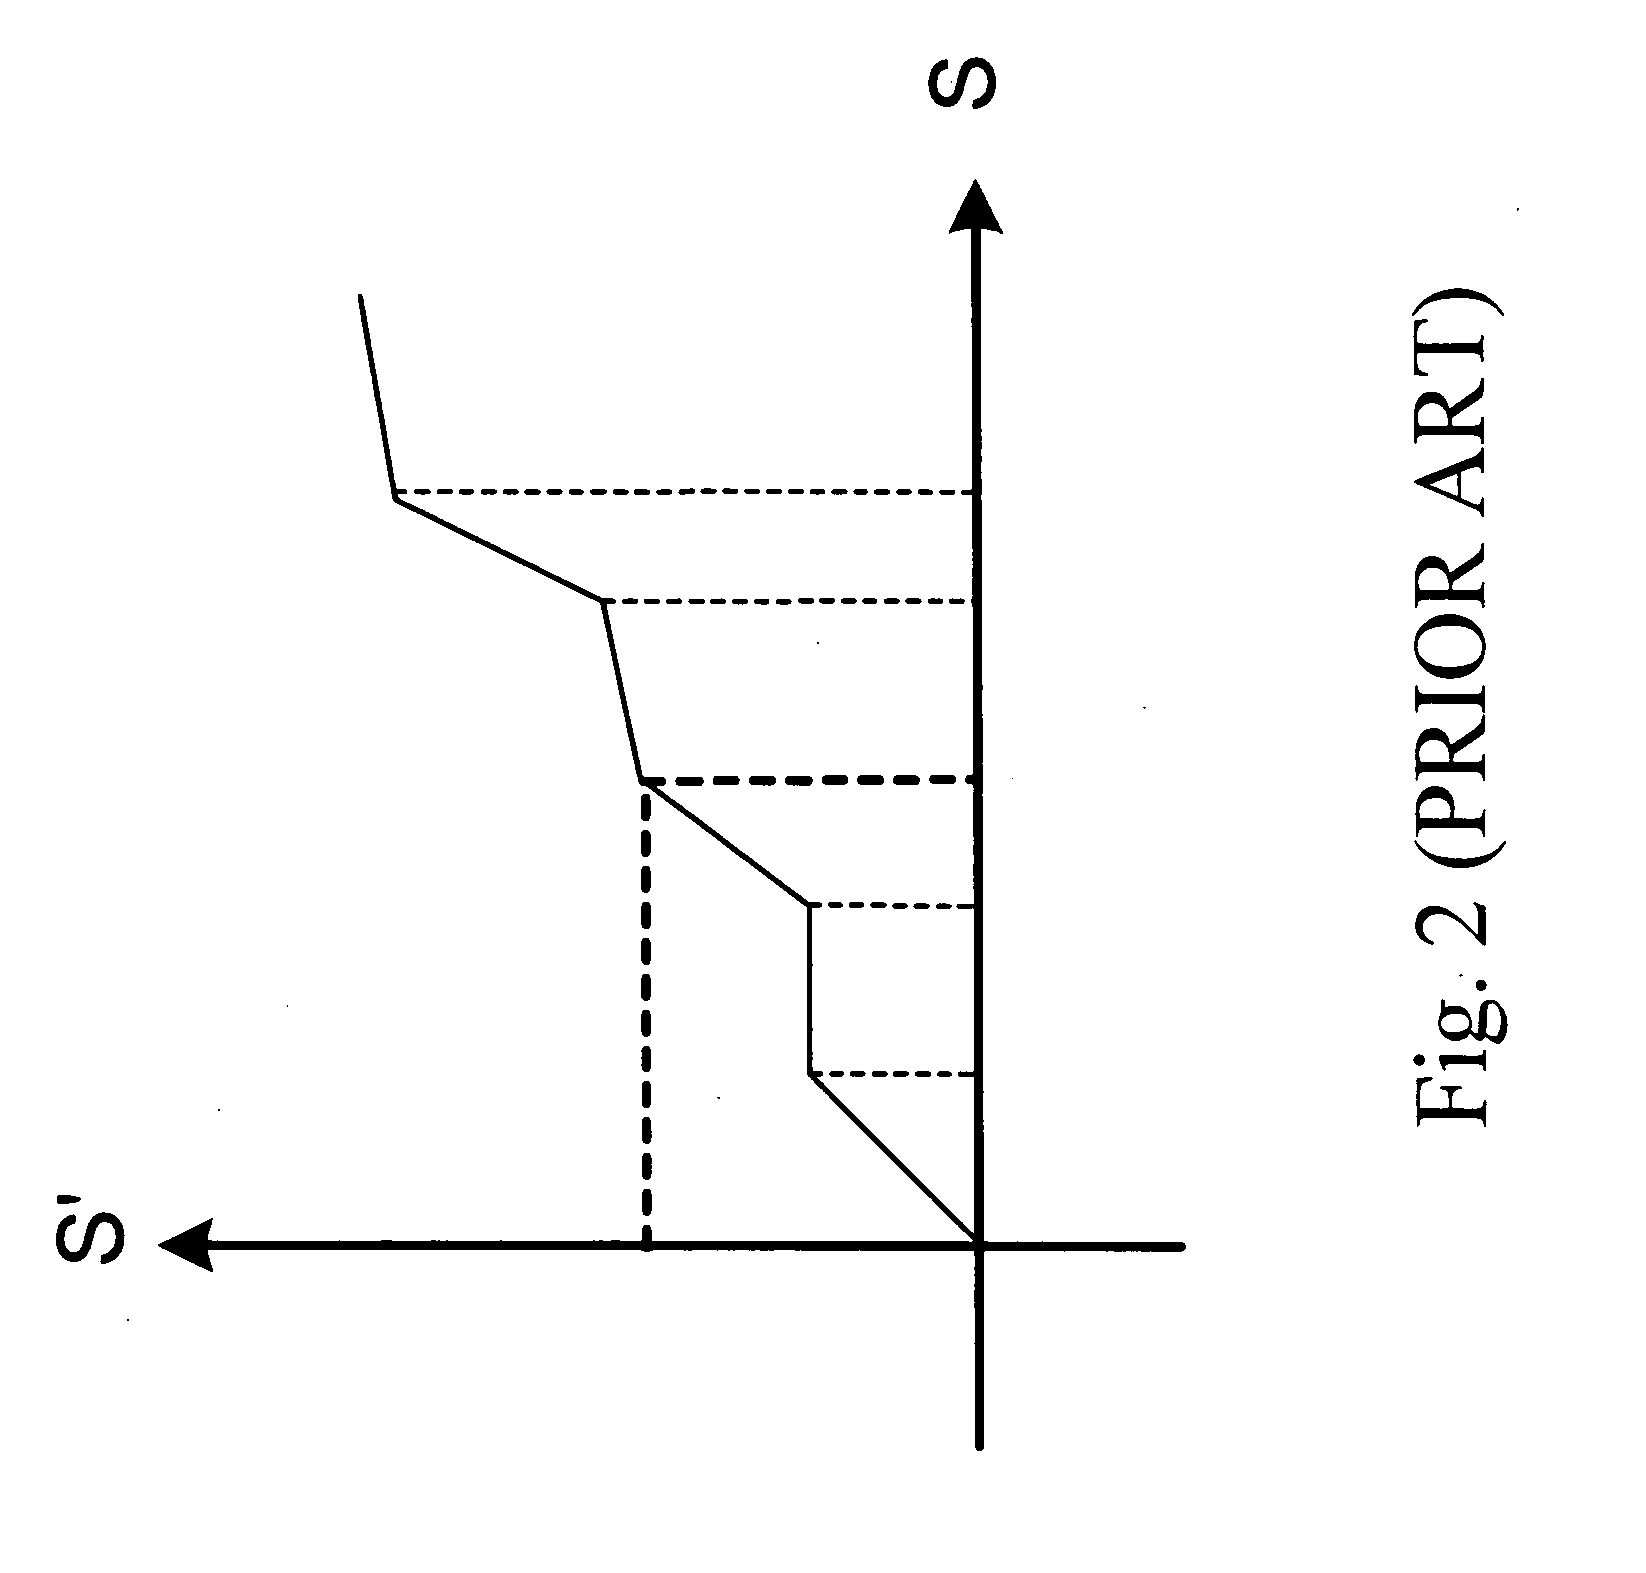 Image processing method and apparatus for color enhancement and correction